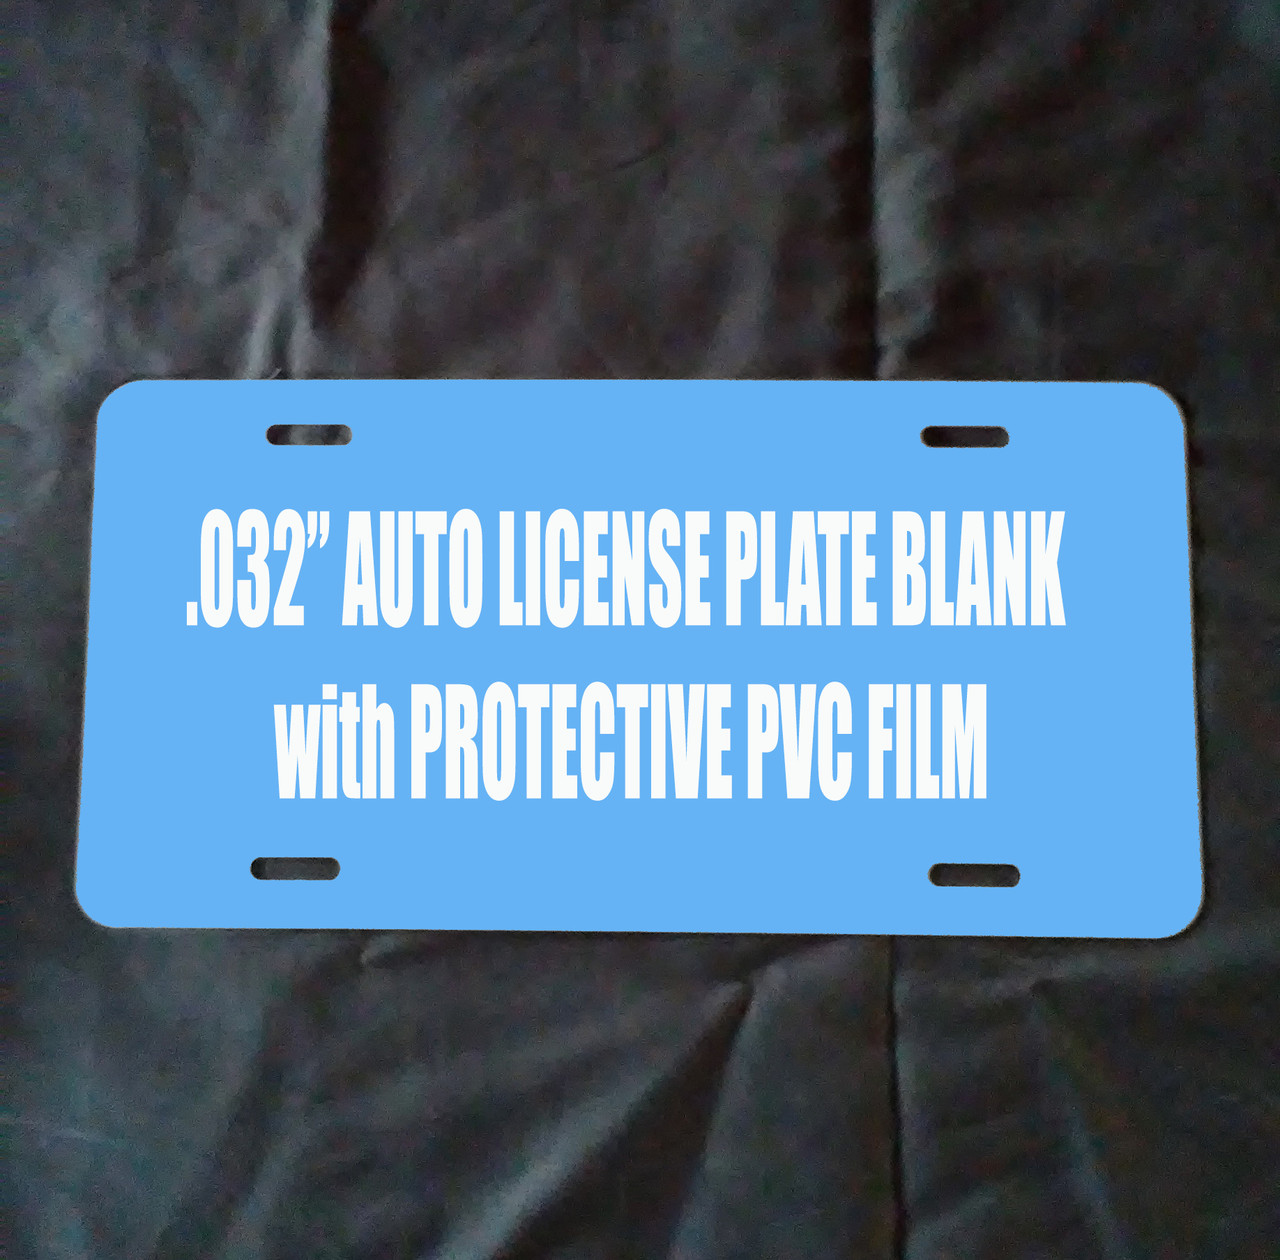 Sublimation license plate blank